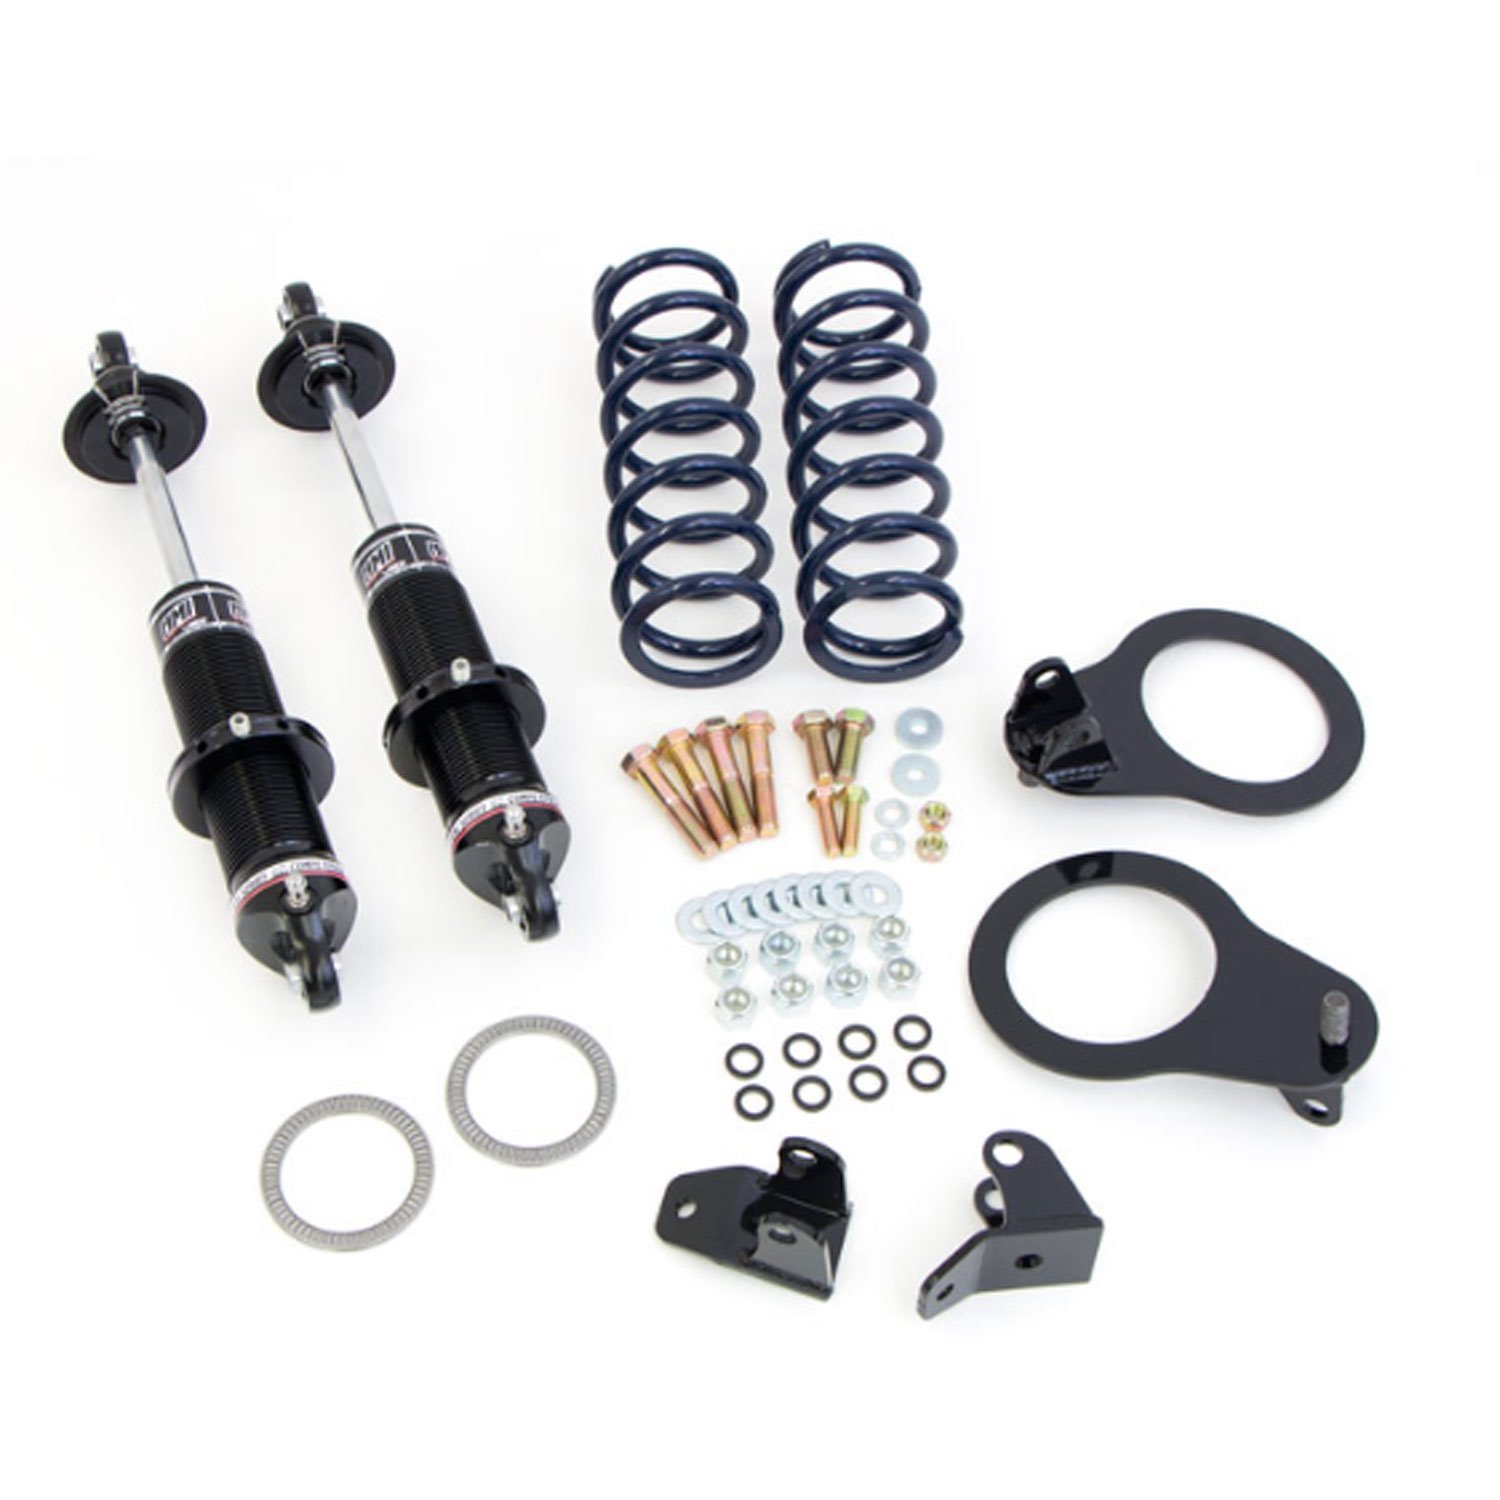 Rear Coilover Shock Kit for 1993-2002 GM F-Body